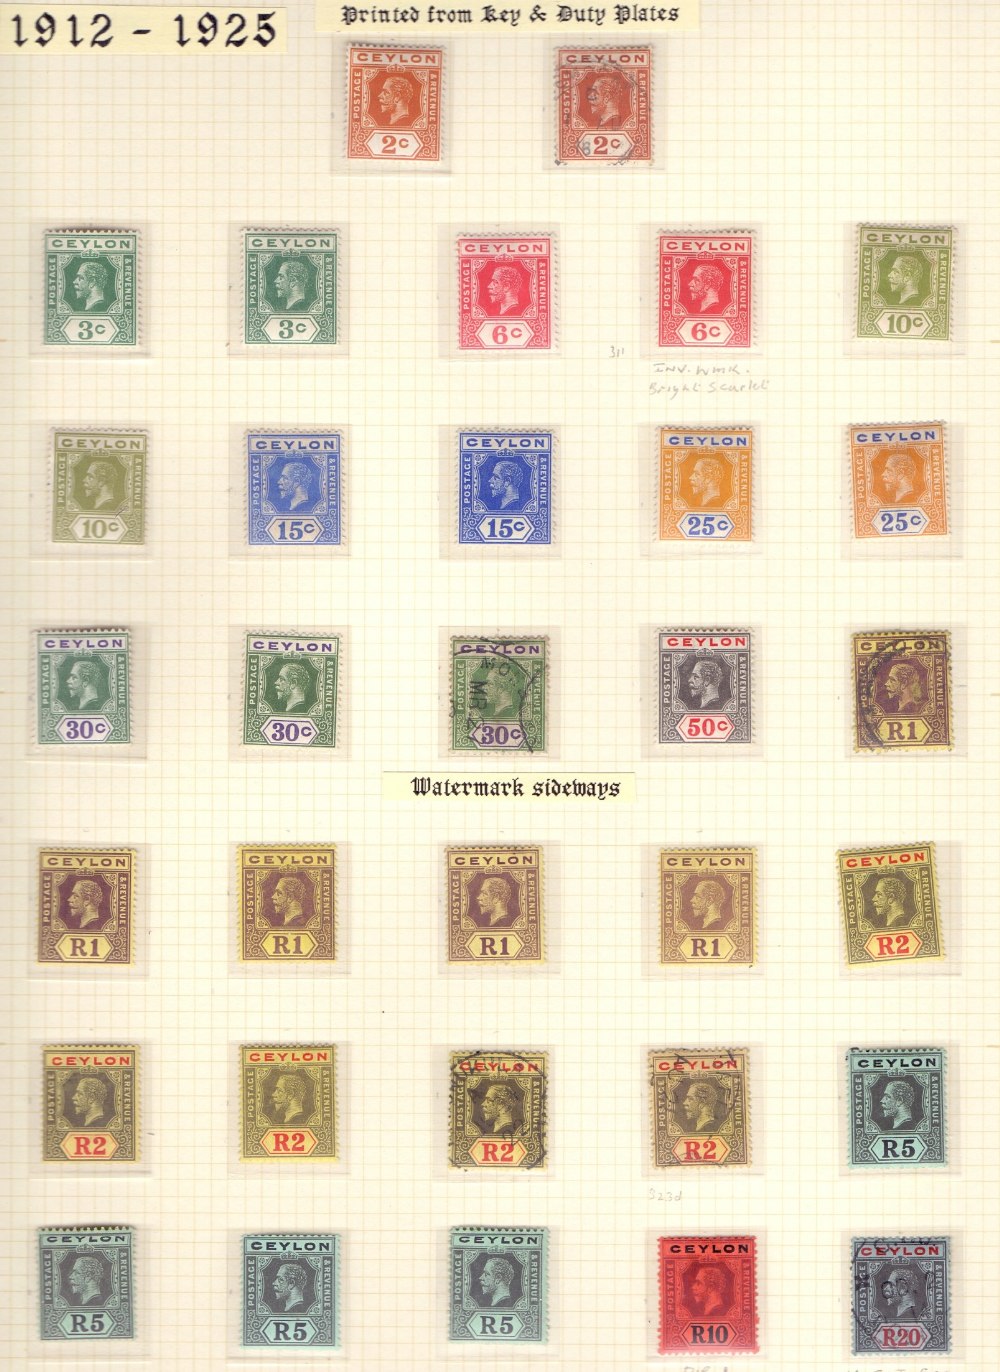 CEYLON STAMPS : A comprehensive mint & used collection inc 1857 issues inc 6d (blued paper), - Image 10 of 10